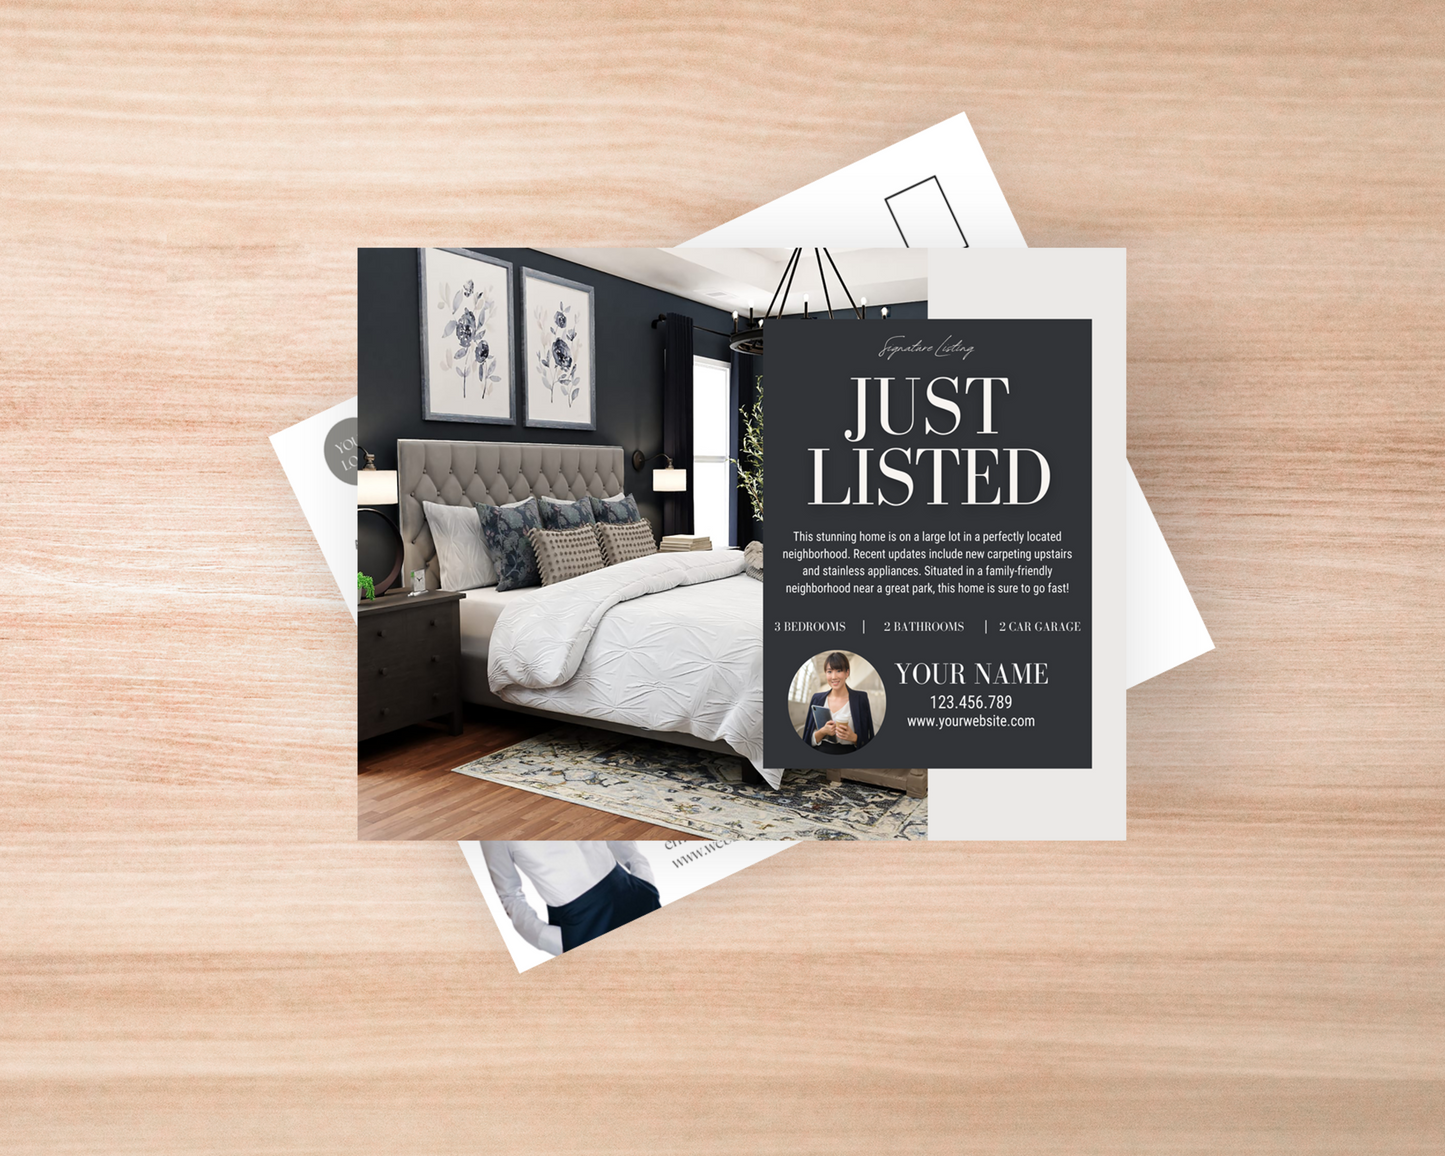 Real Estate Template – Real Estate Postcard 3 - Just Listed